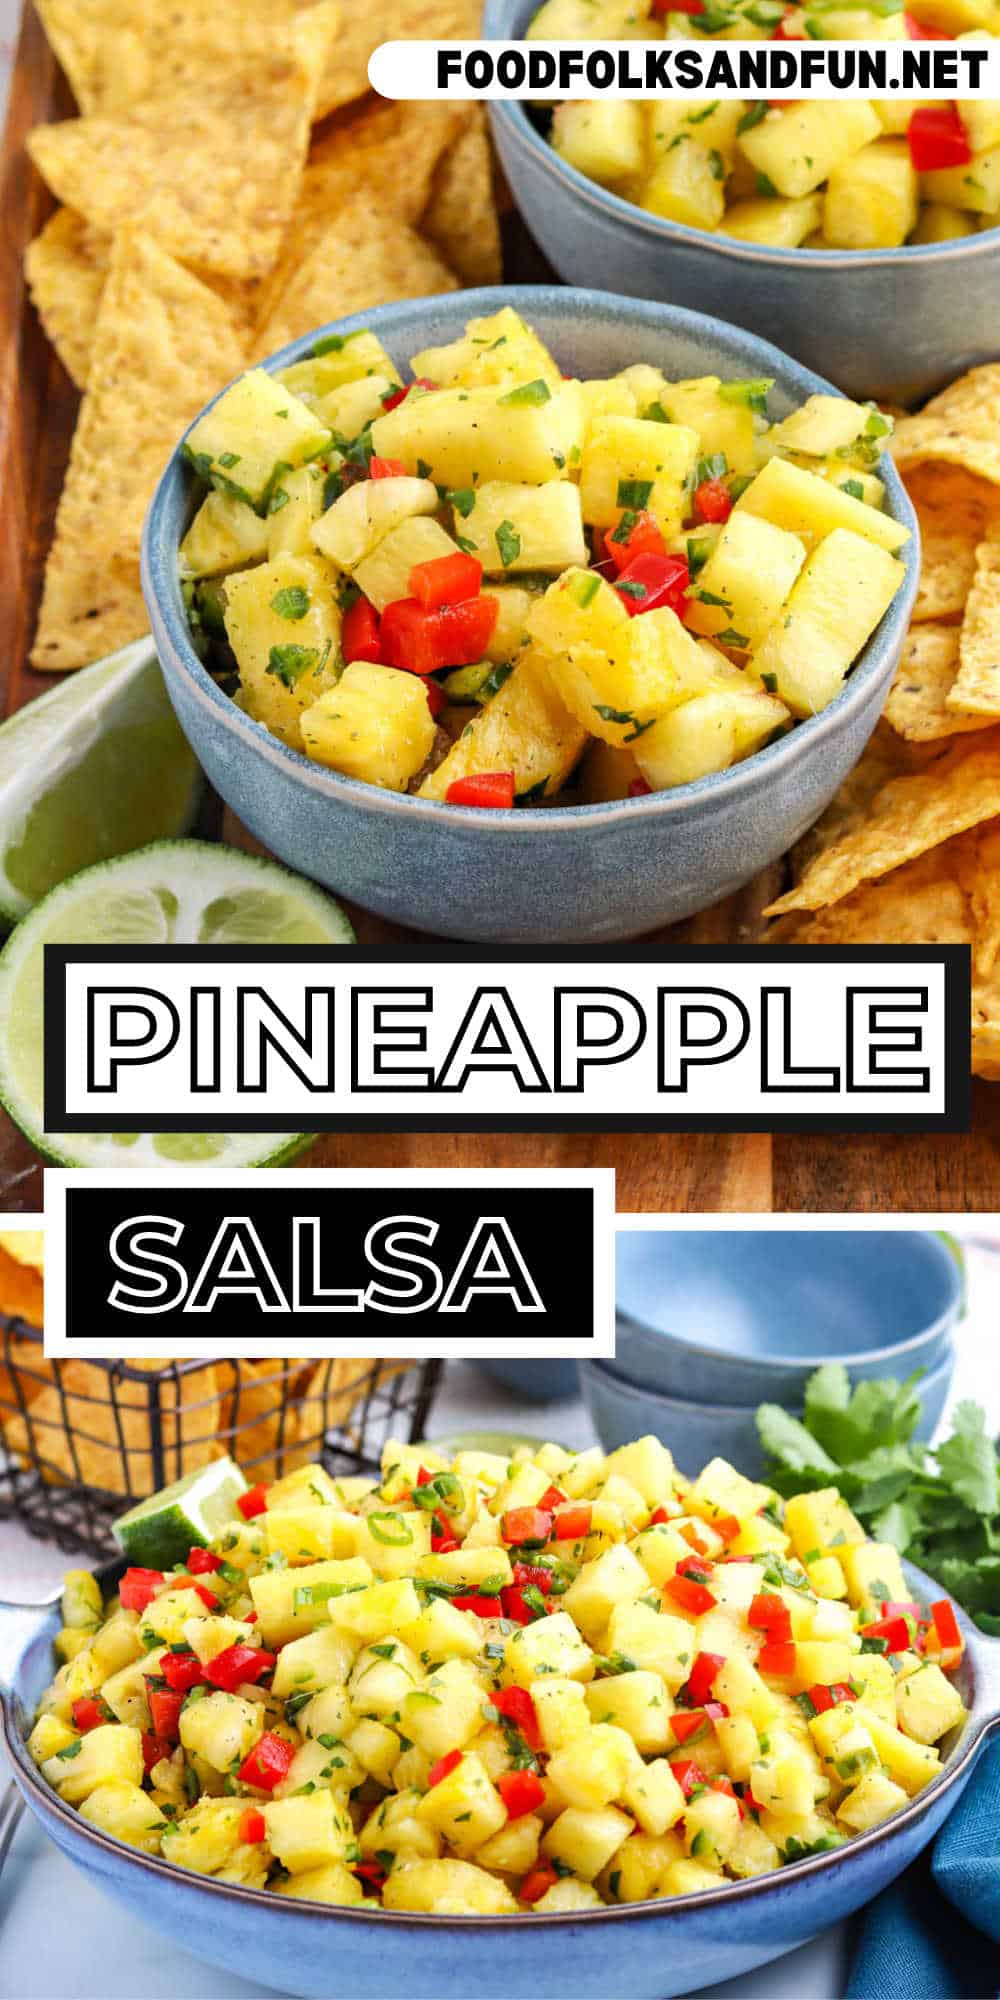 This easy pineapple salsa recipe is beautifully colorful, sweet, and versatile! I use it as a side dish, an appetizer, or a topping on tacos, chicken, pork, or even steak. Plus, it’s great for canning so you can enjoy it year-round!
 via @foodfolksandfun